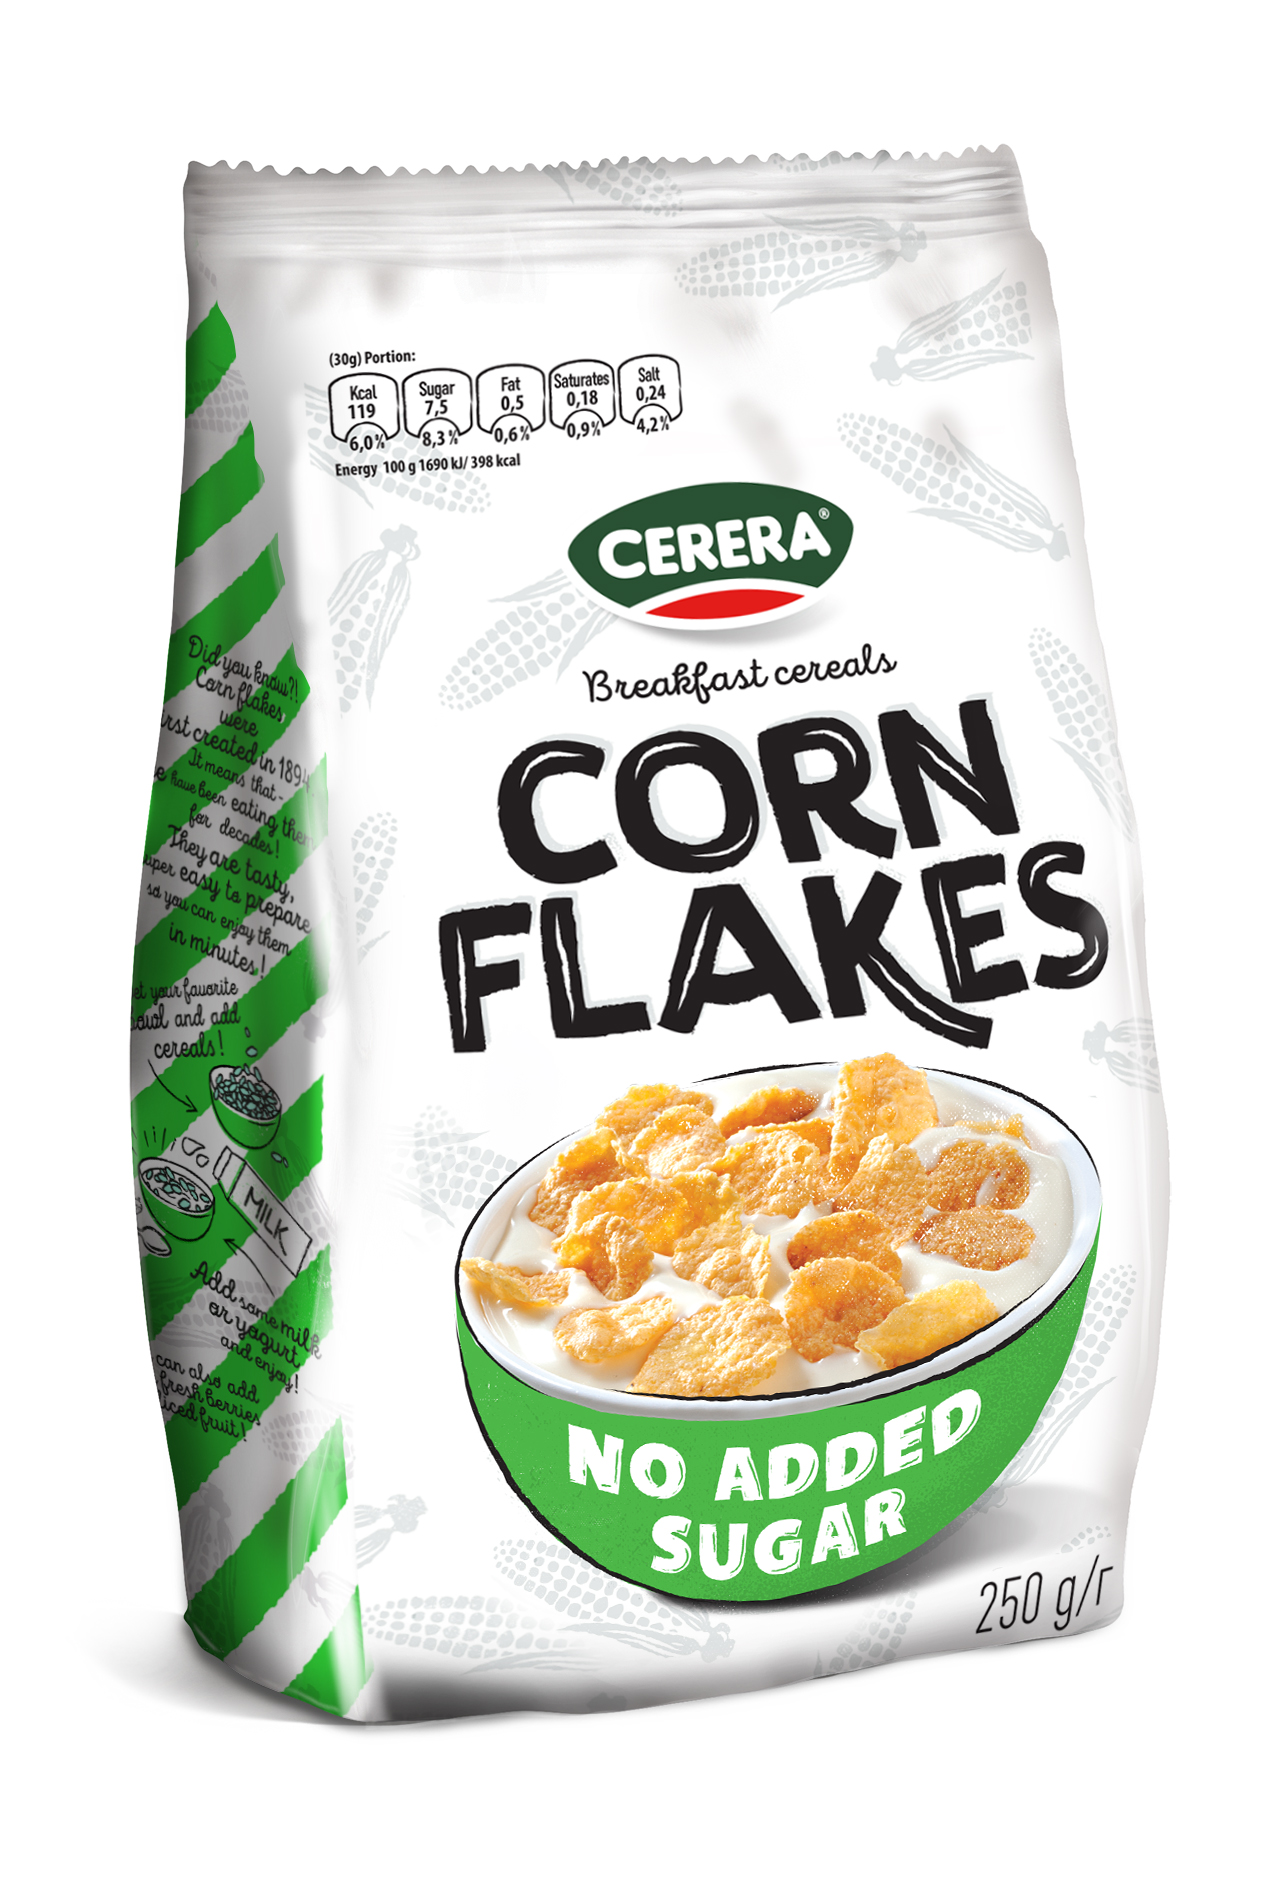 no added sugar corn flakes businessowner businessgrowth business management realestate markets innovation technology breakfast cereal manufacture tasty food cerera foods shape form taste color chocolate balls pillows shells corn flakes rings brand private label choco honey cookie sticks puffs puffed lithuania manufactory vanilla hazelnut cinamonn rice wheat cereo fruity hoops fruit production line company supply snack snacks retail wholesale distribution import